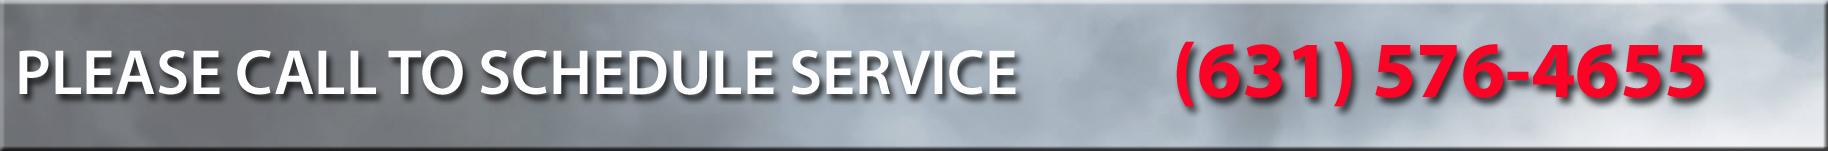 Call To schedule service